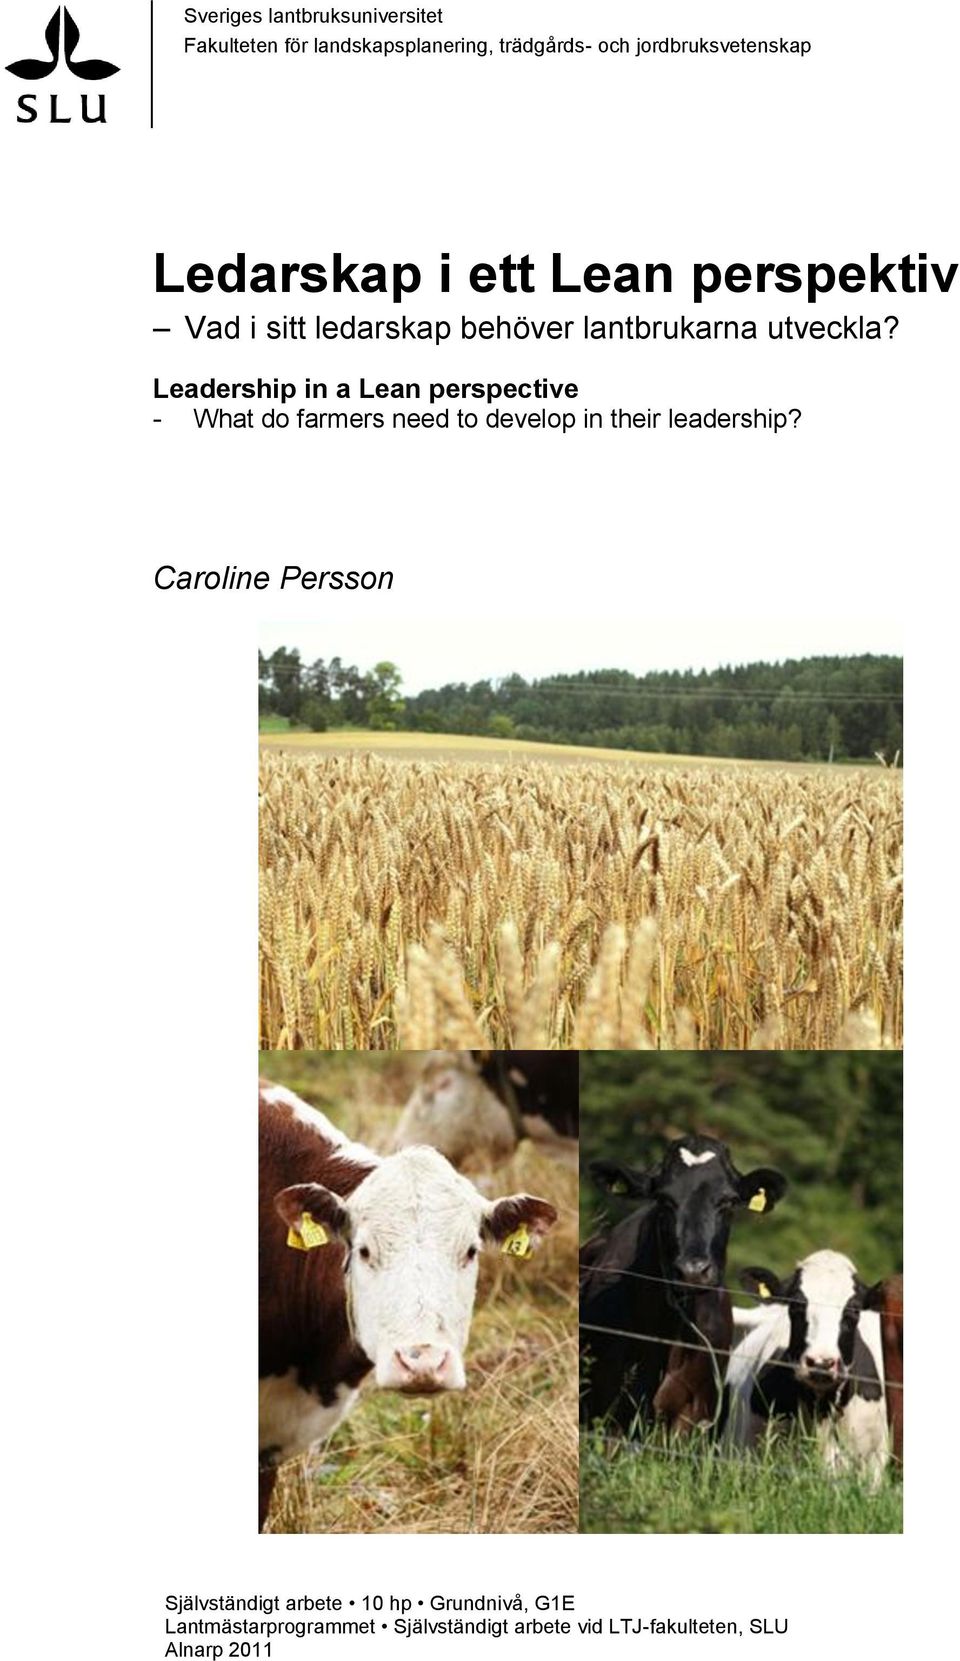 Leadership in a Lean perspective - What do farmers need to develop in their leadership?